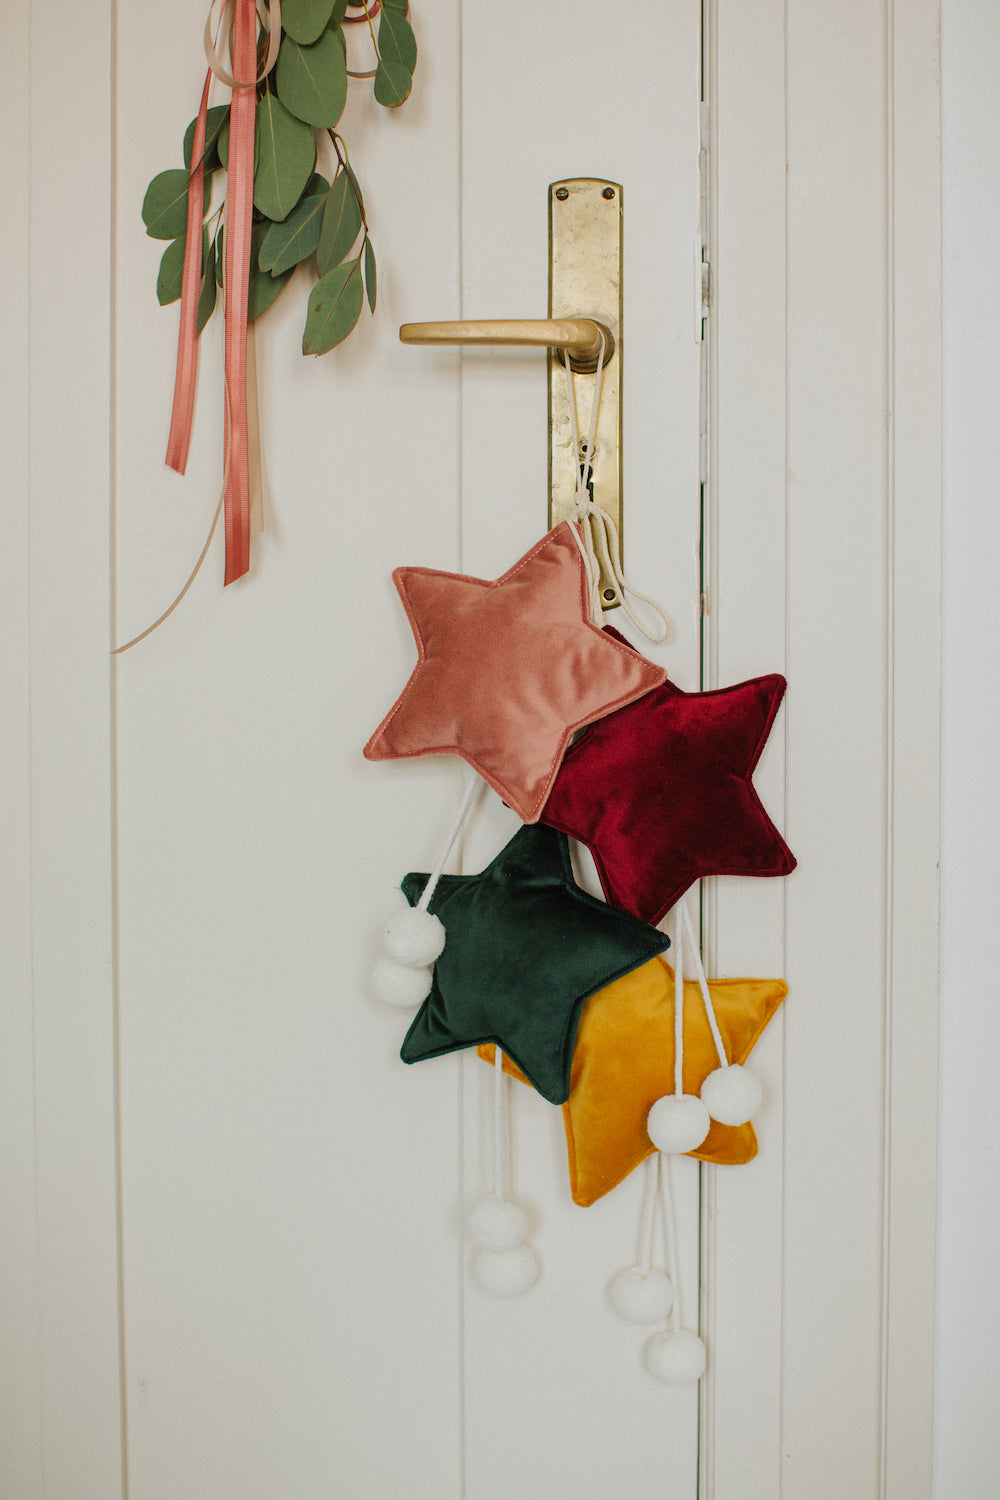 velvet little star pendant green by bettys home hanging on door handle together with green star, wine star, yellow star